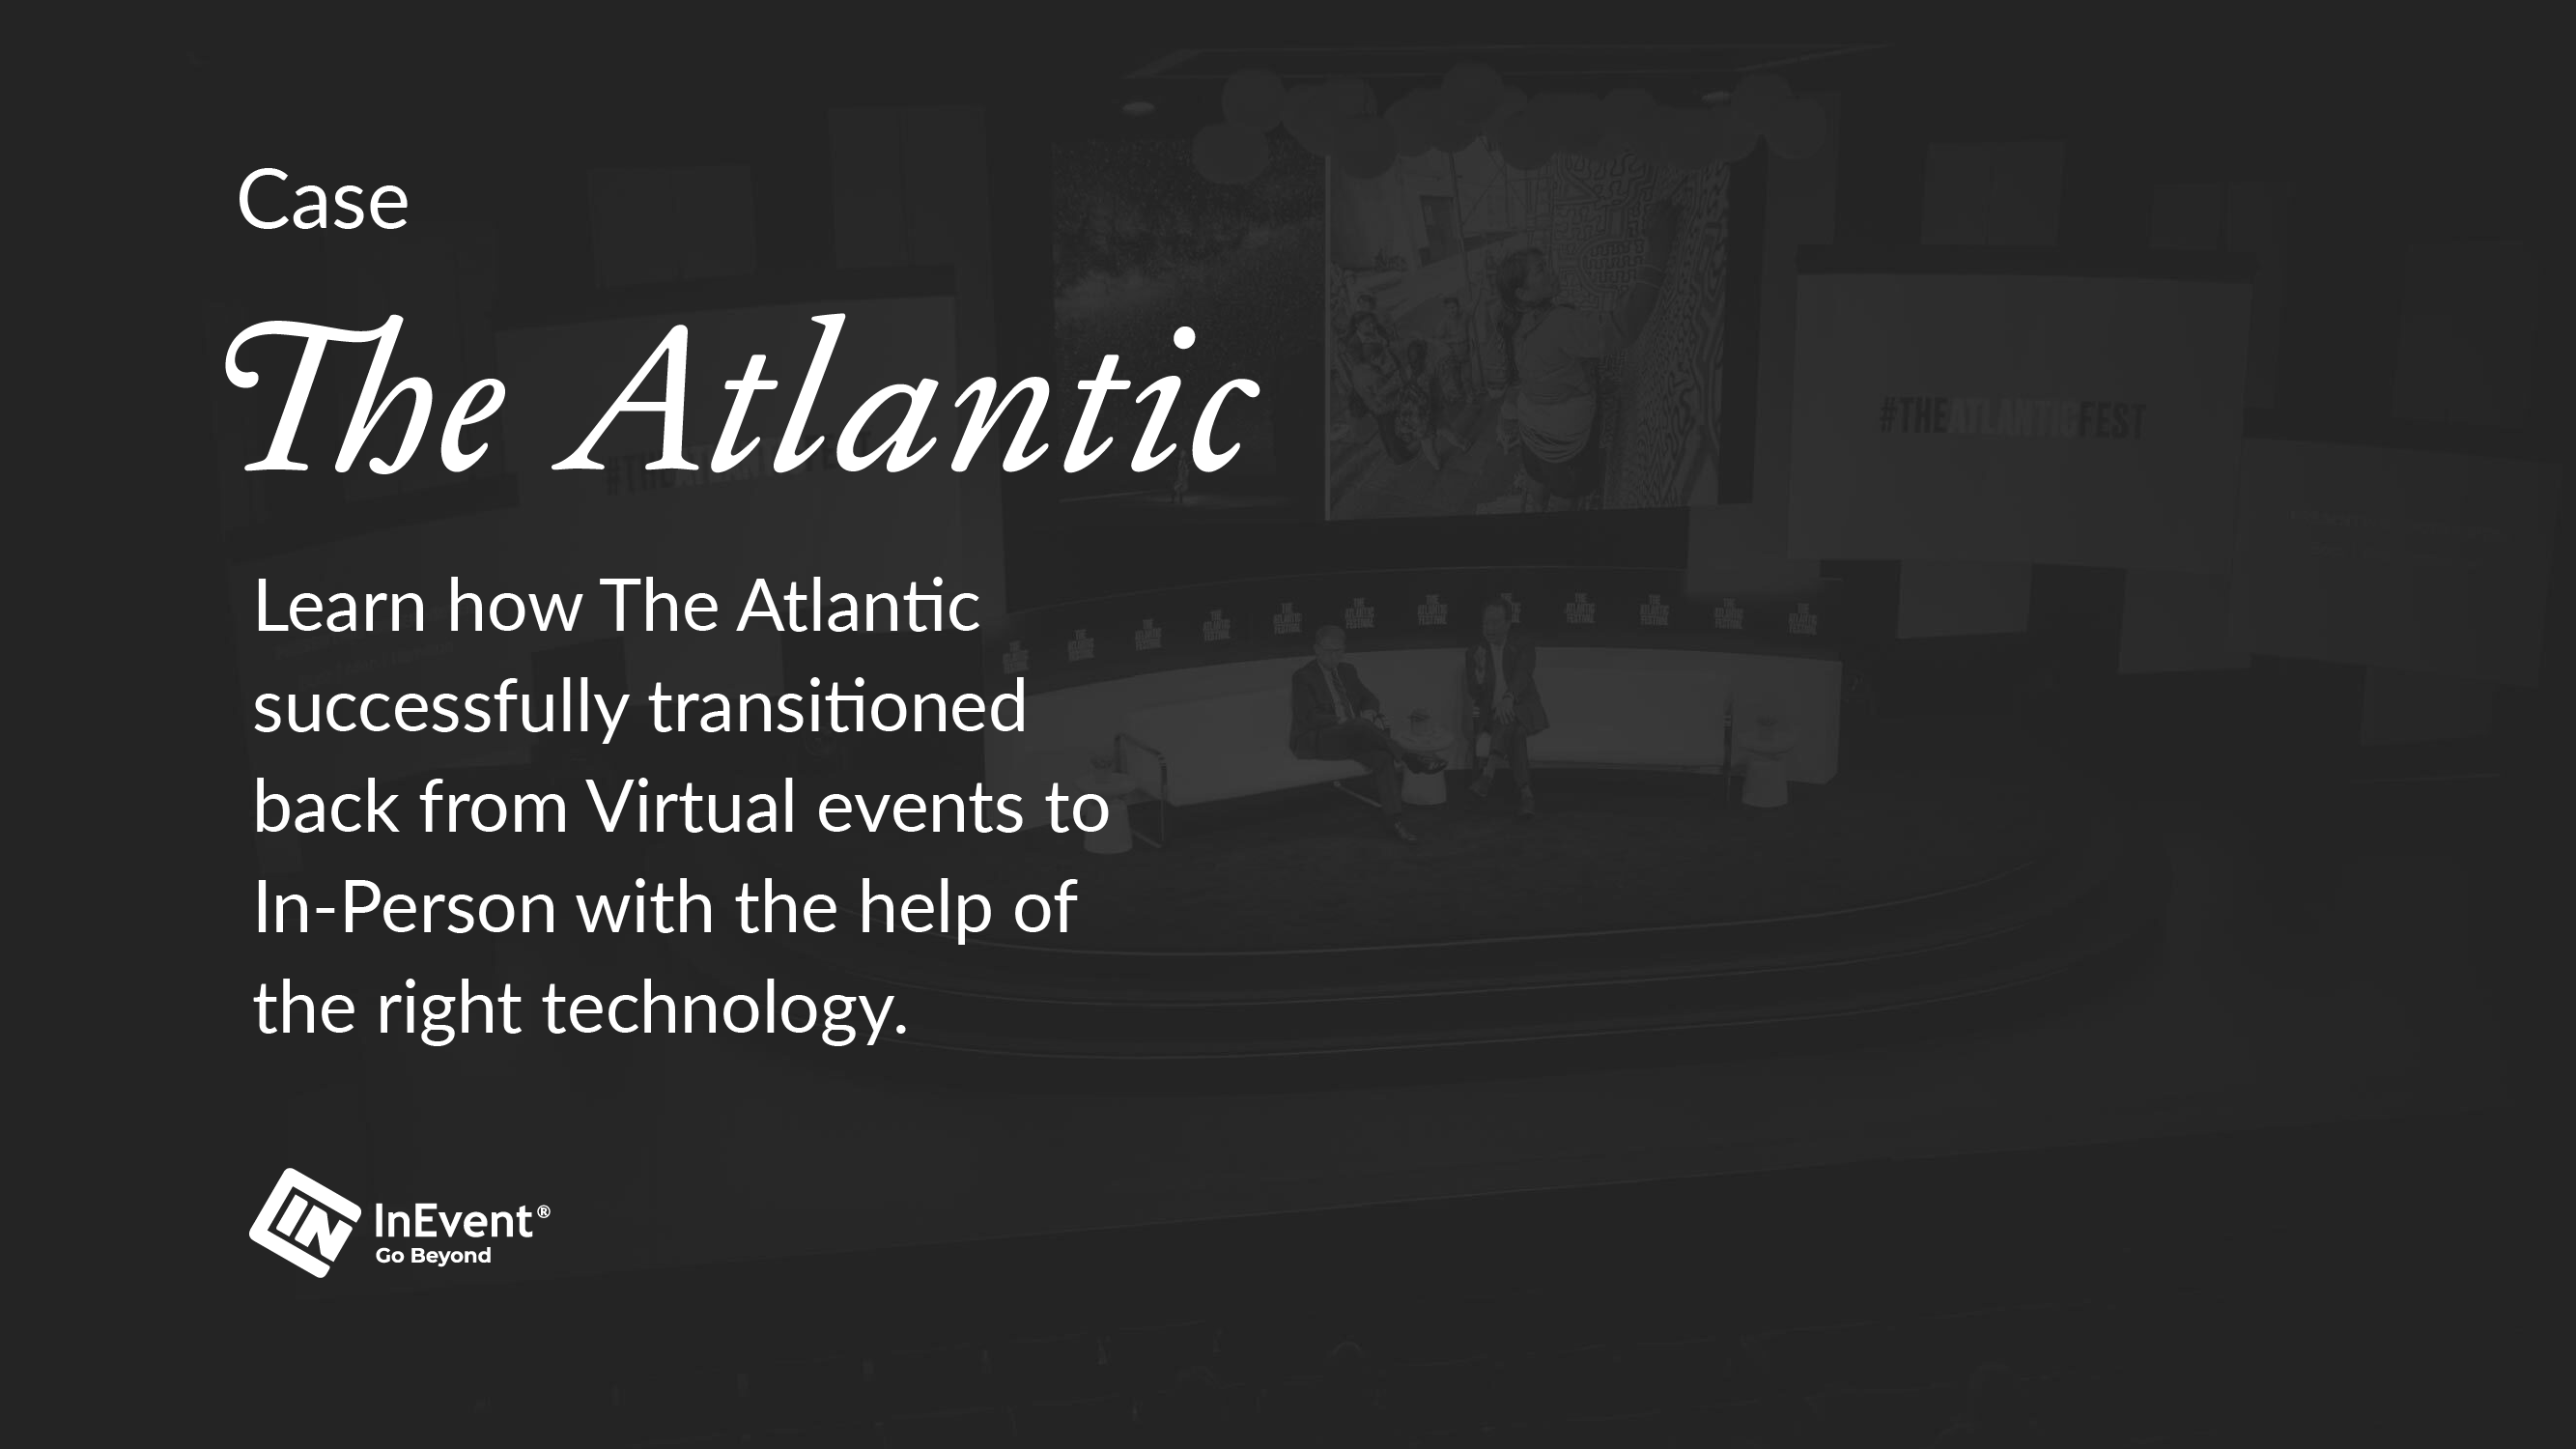 The Atlantic hosts inspiring in-person events